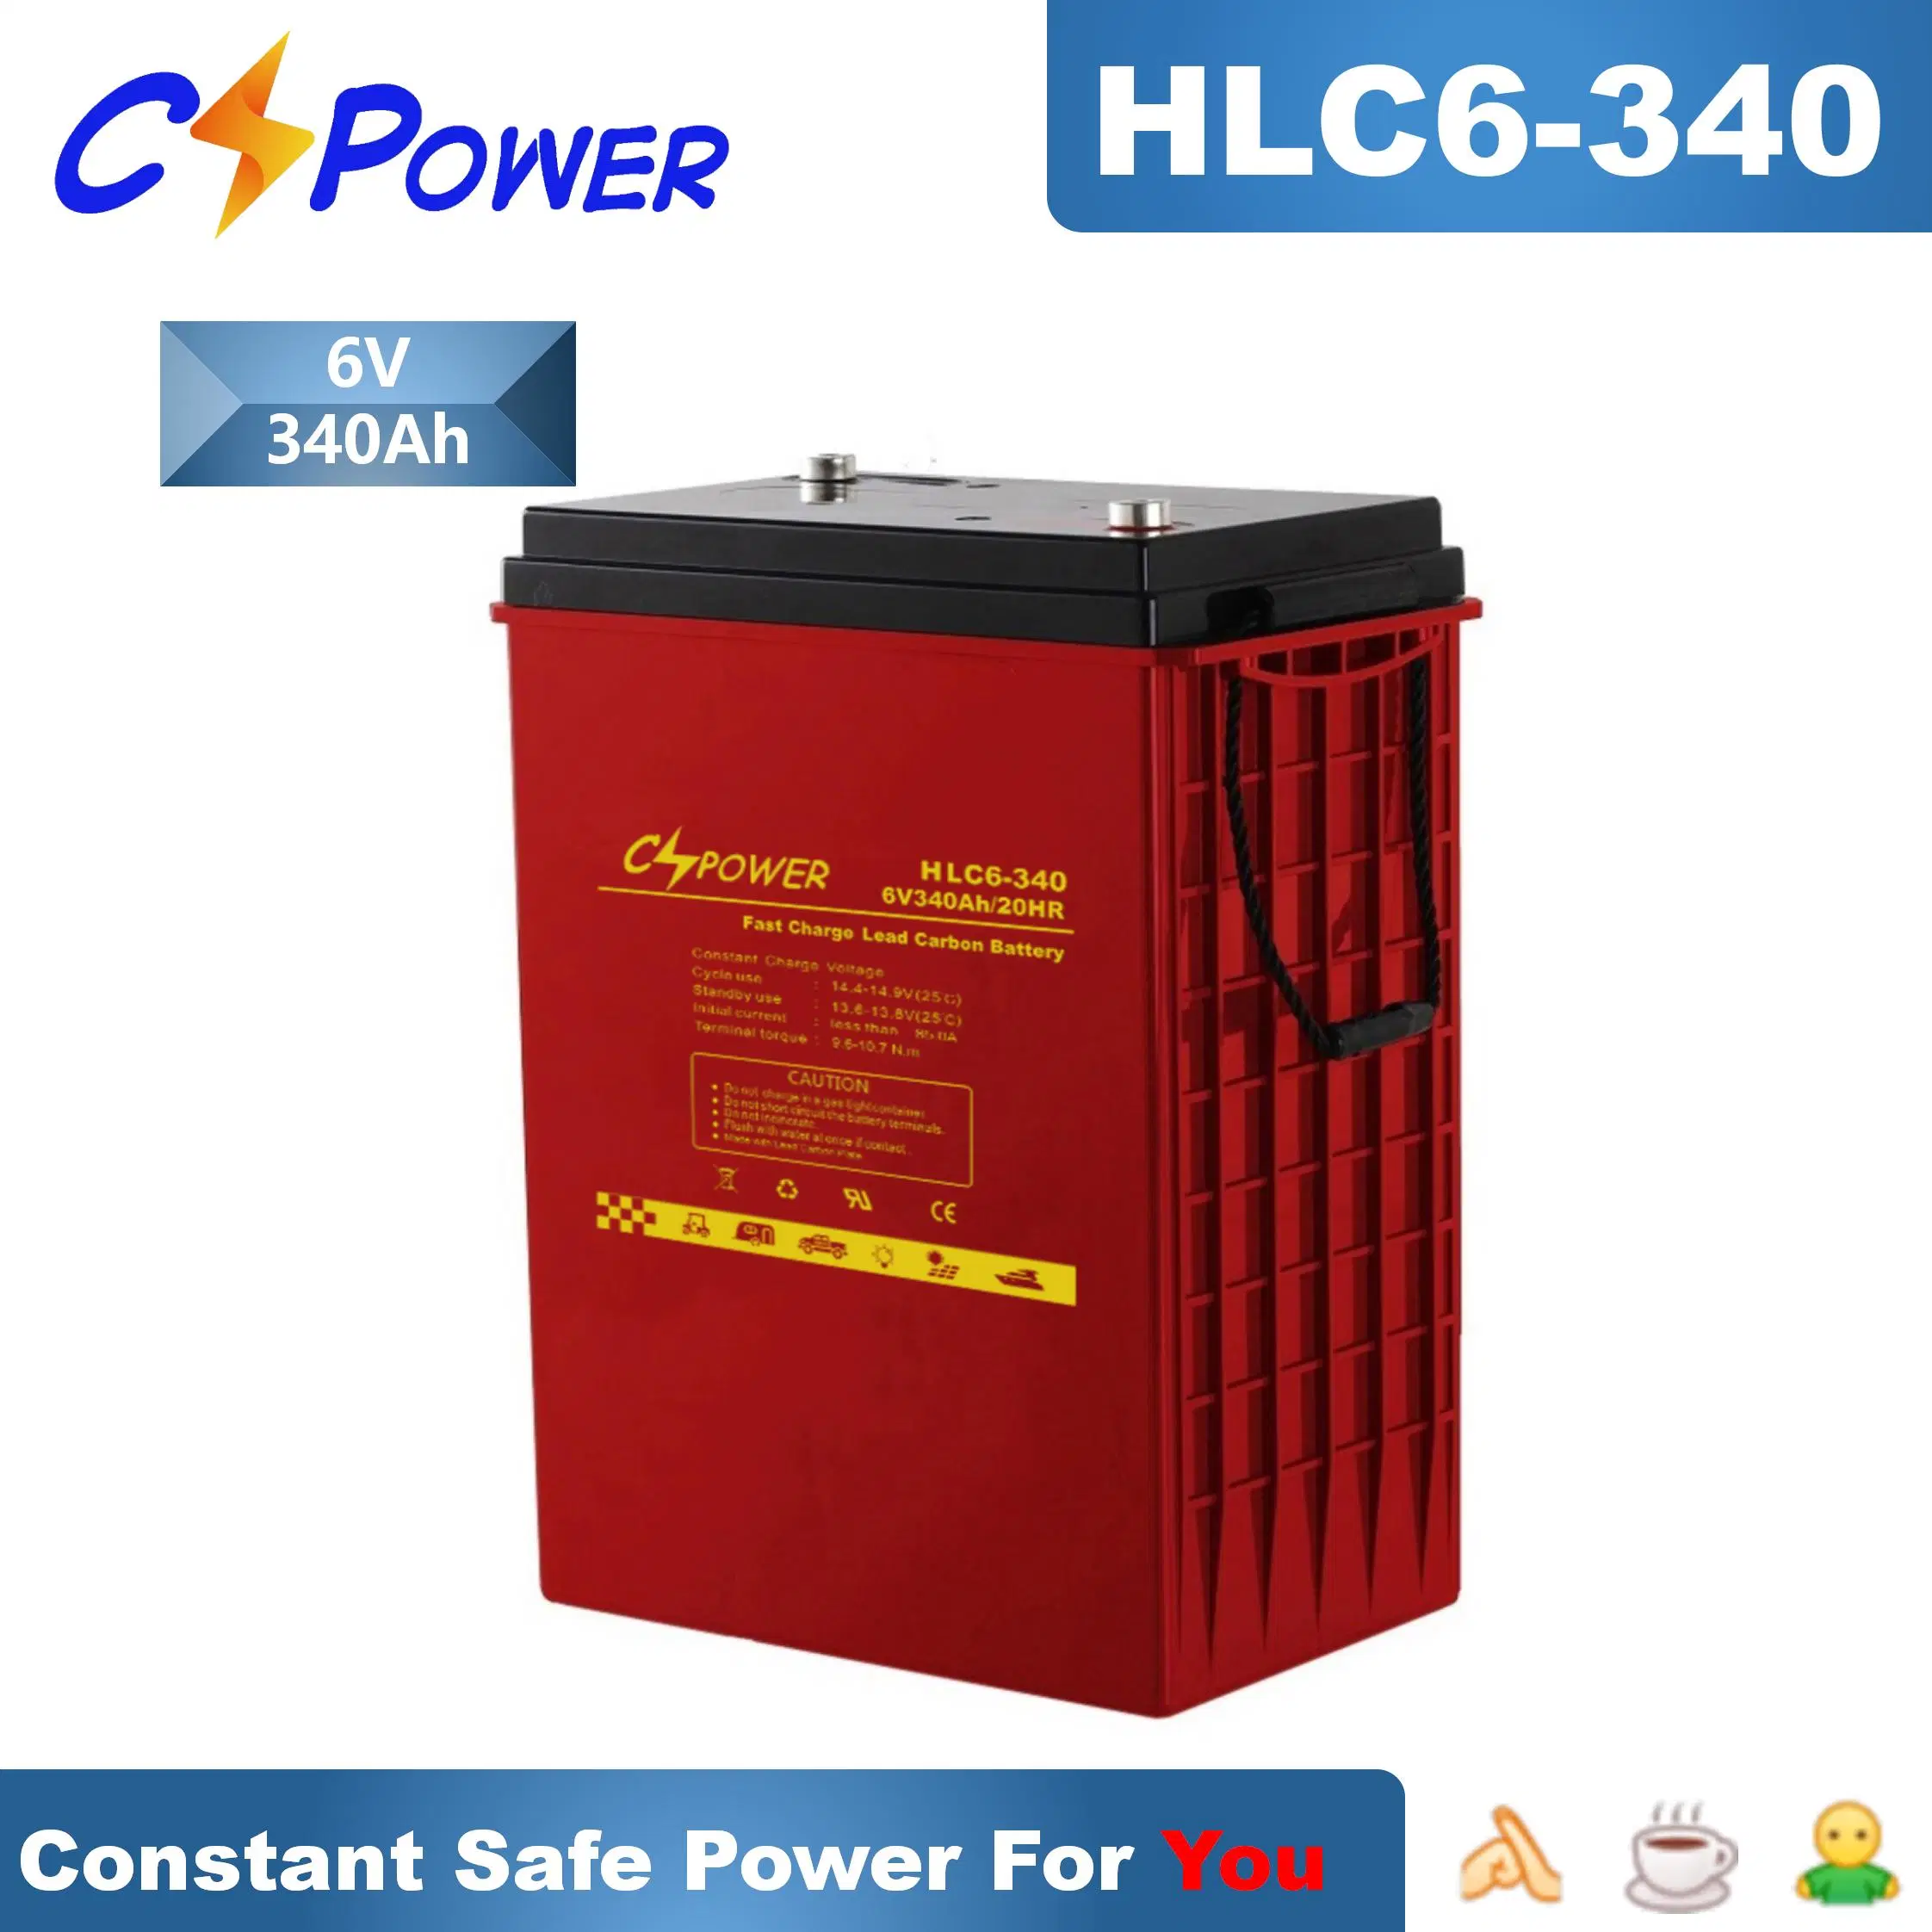 Cspower Battery Hlc 6-400 Fast Charge Long-Life-Lead-Carbon-Battery/UPS-Battery/Inverter-Battery/Maintenance-Free Battery/Energy-Storage-System-Battery